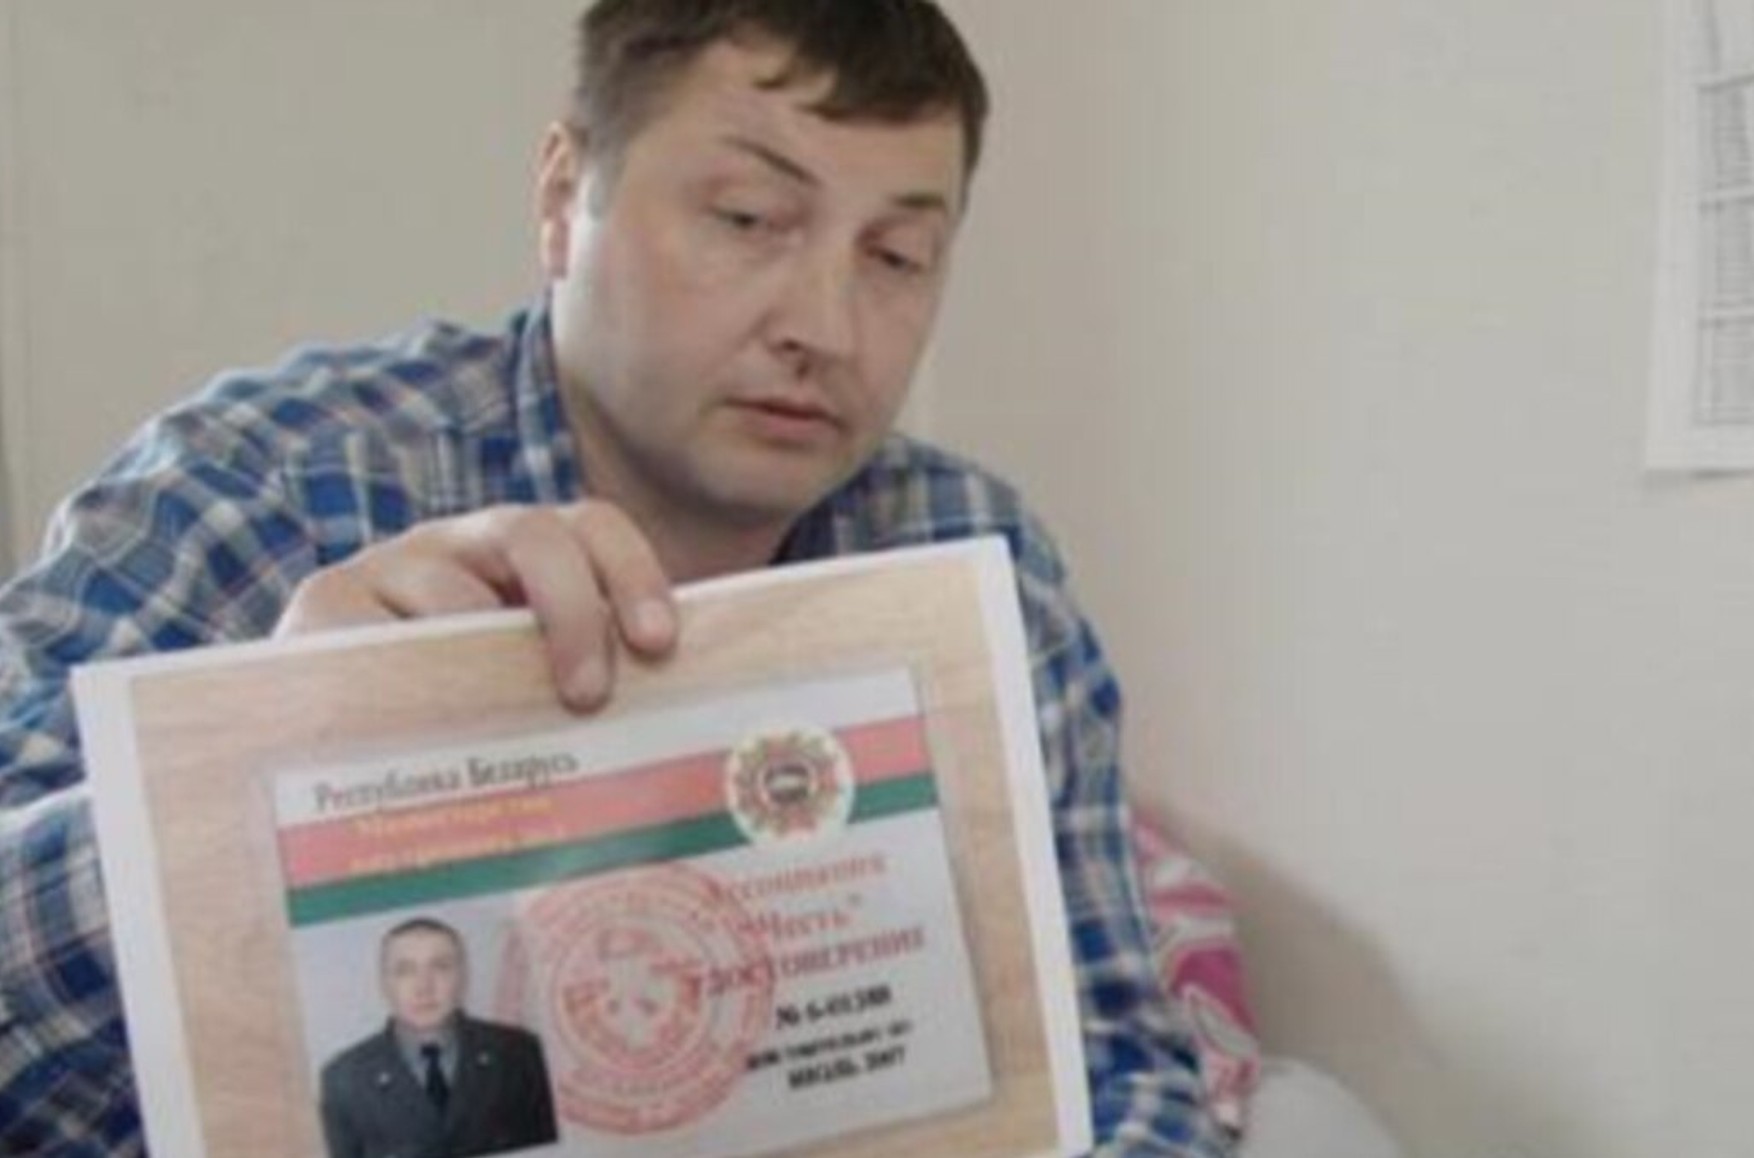 In Switzerland a fighter of the Belarusian SOBR who participated In Switzerland, a fighter of the Belarusian SOBR, who participated in the organization of the "disappearances" of Lukashenka's opponents, will be tried